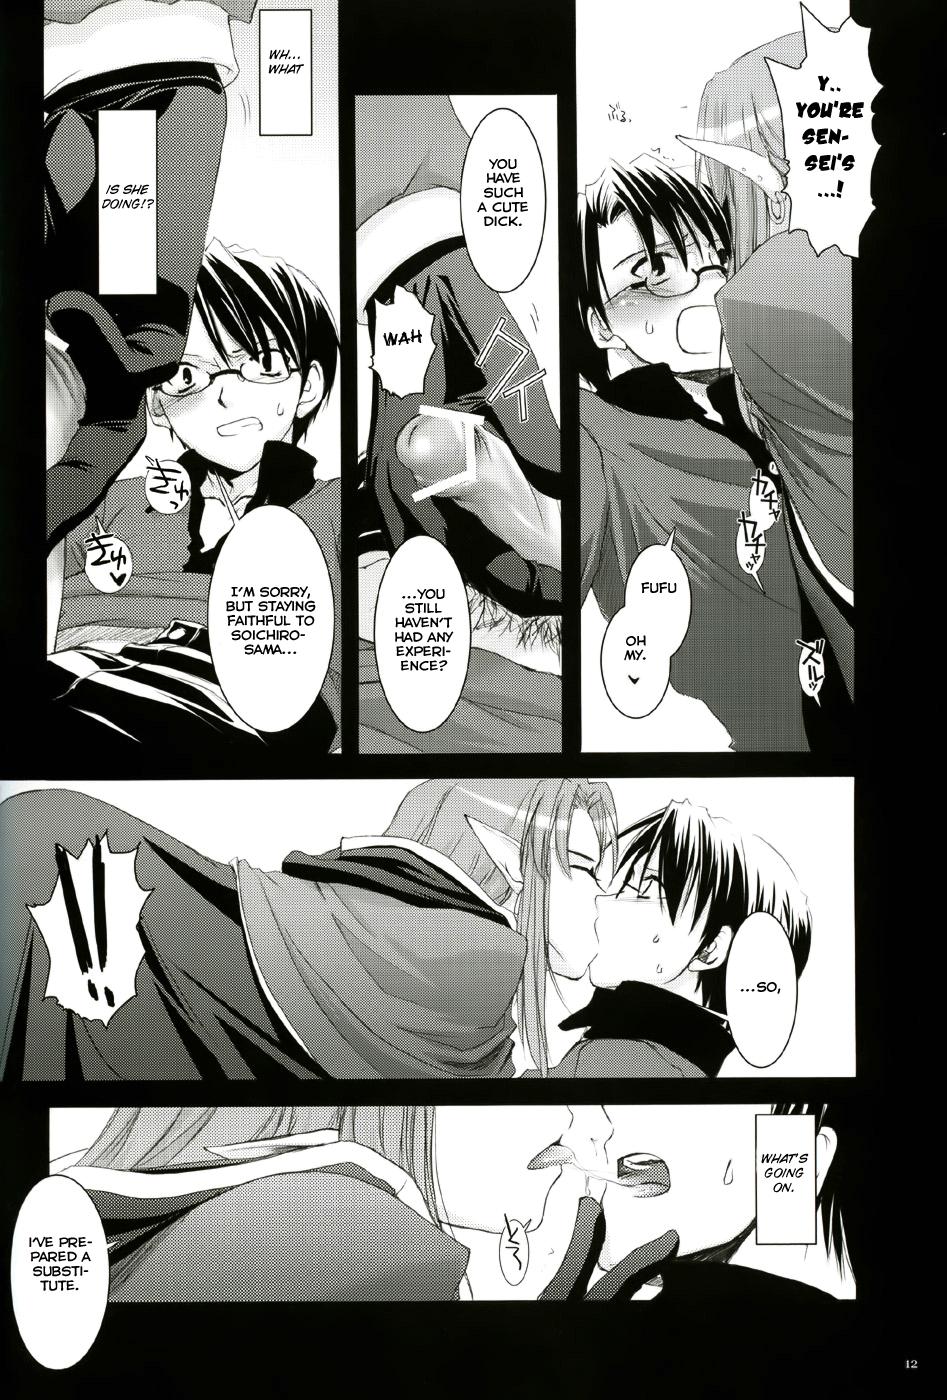 Best Blowjobs D.L. action 27 - Fate stay night Pinoy - Page 11